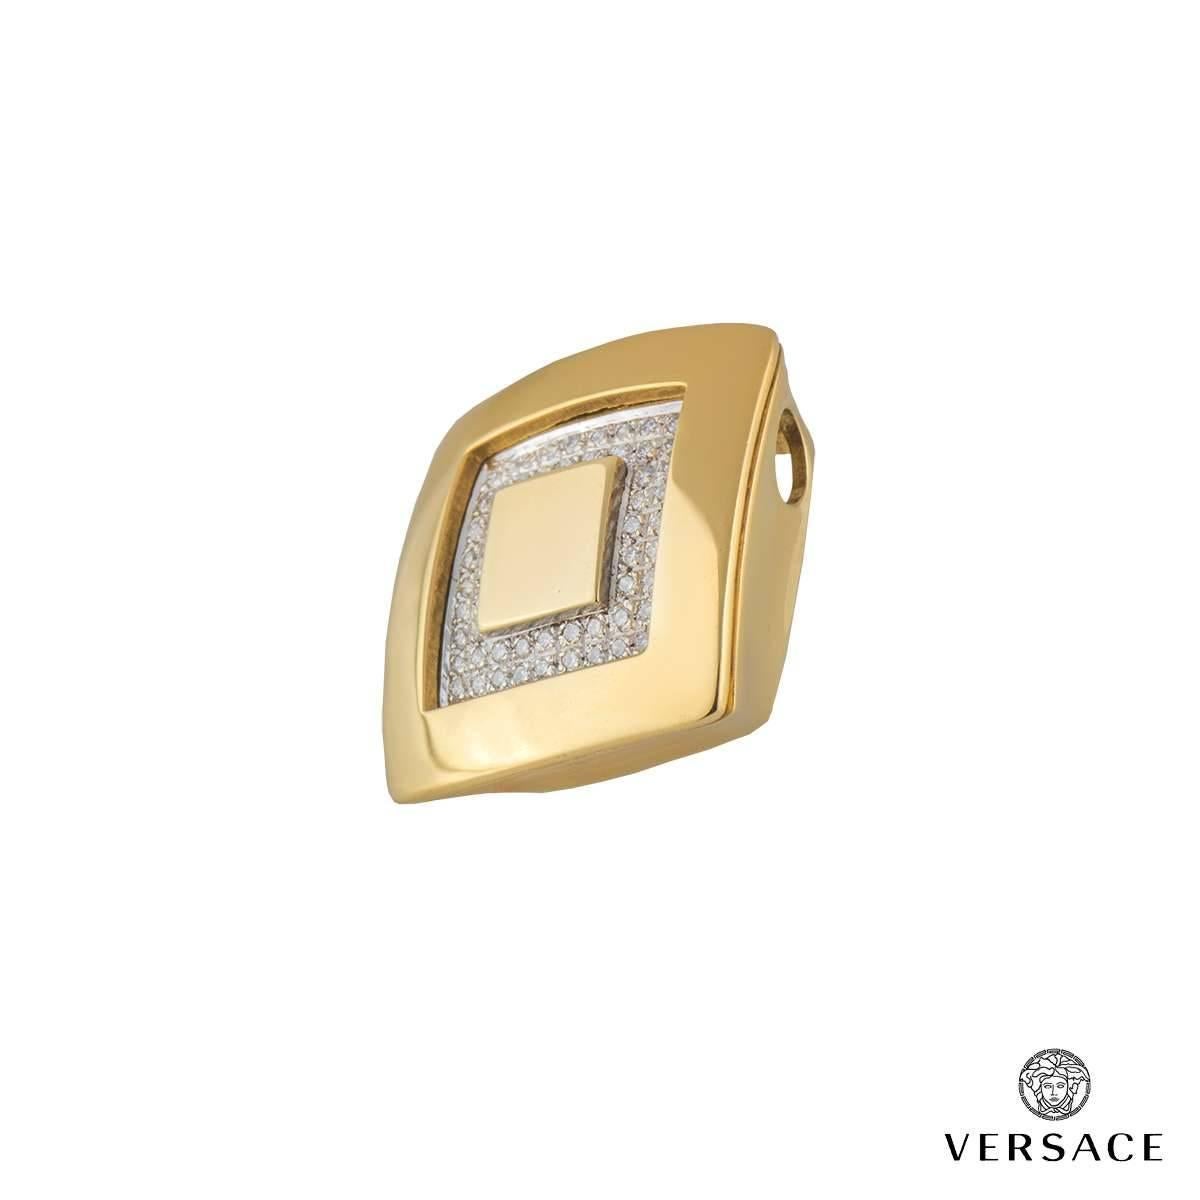 Women's Versace Diamond and Gold Matching Pendant and Earrings Suite